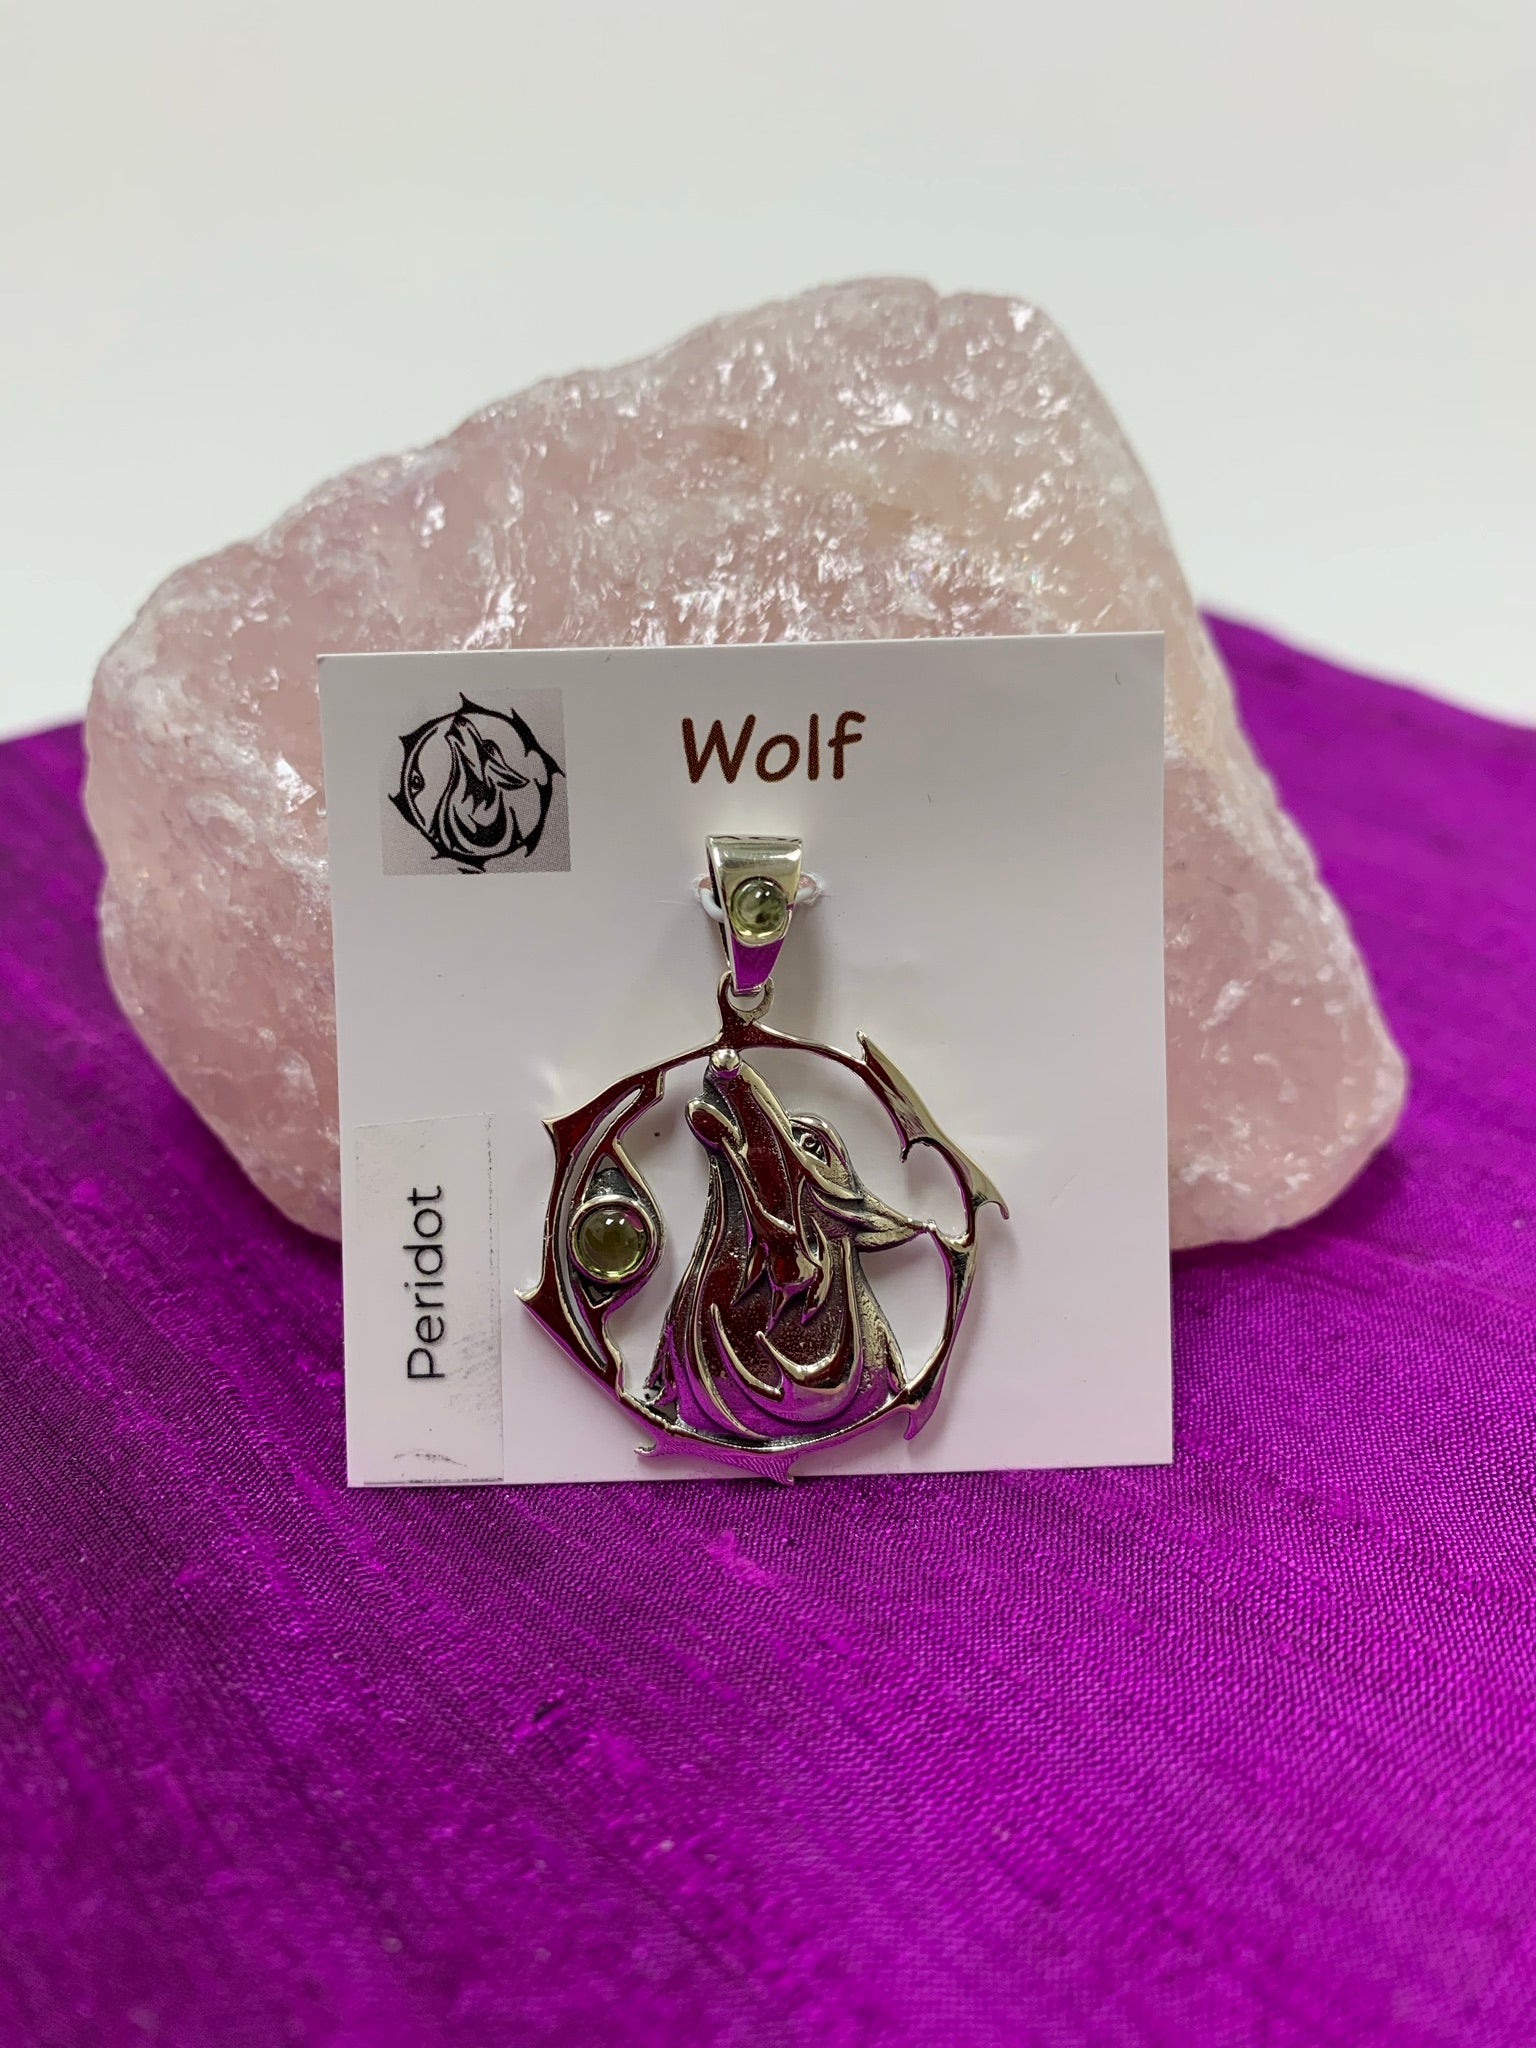 Sterling Silver wolf spirit animal pendant. Howling wolf (head and part of body) inside a fancy, stylized circle. Two peridot gemstones (cabs), one on the actual pendant and one on the bail. Wear your spirit animal on your chest and carry it with you wherever you go! (Pendant only, no necklace chain). 